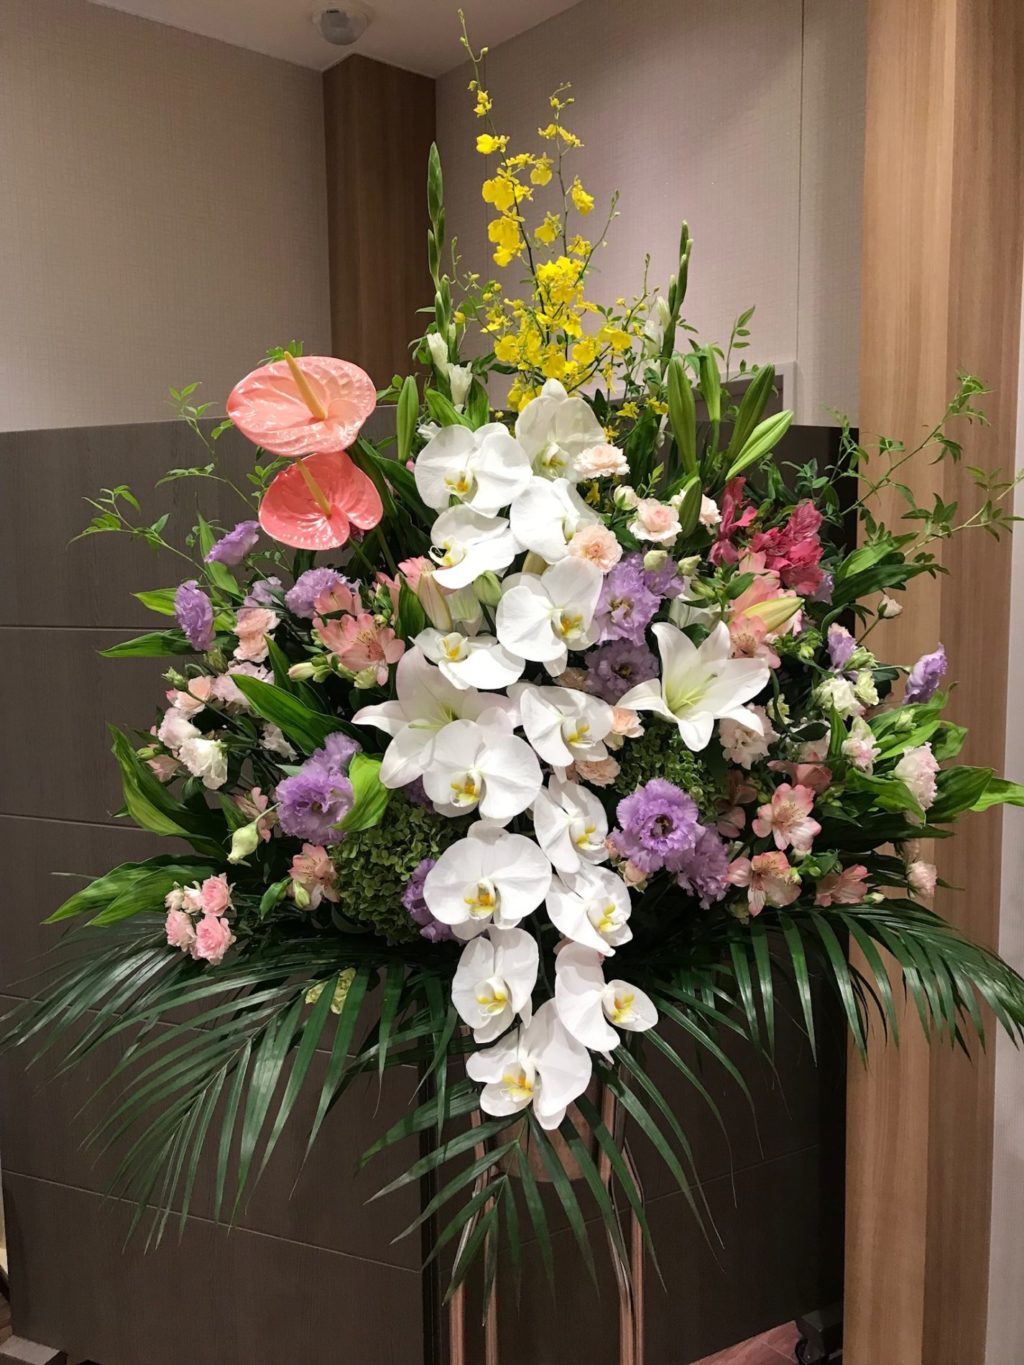 
Western flower 1-tier stand: From 16,500 yen tax included (photo shows 22,000 yen item)